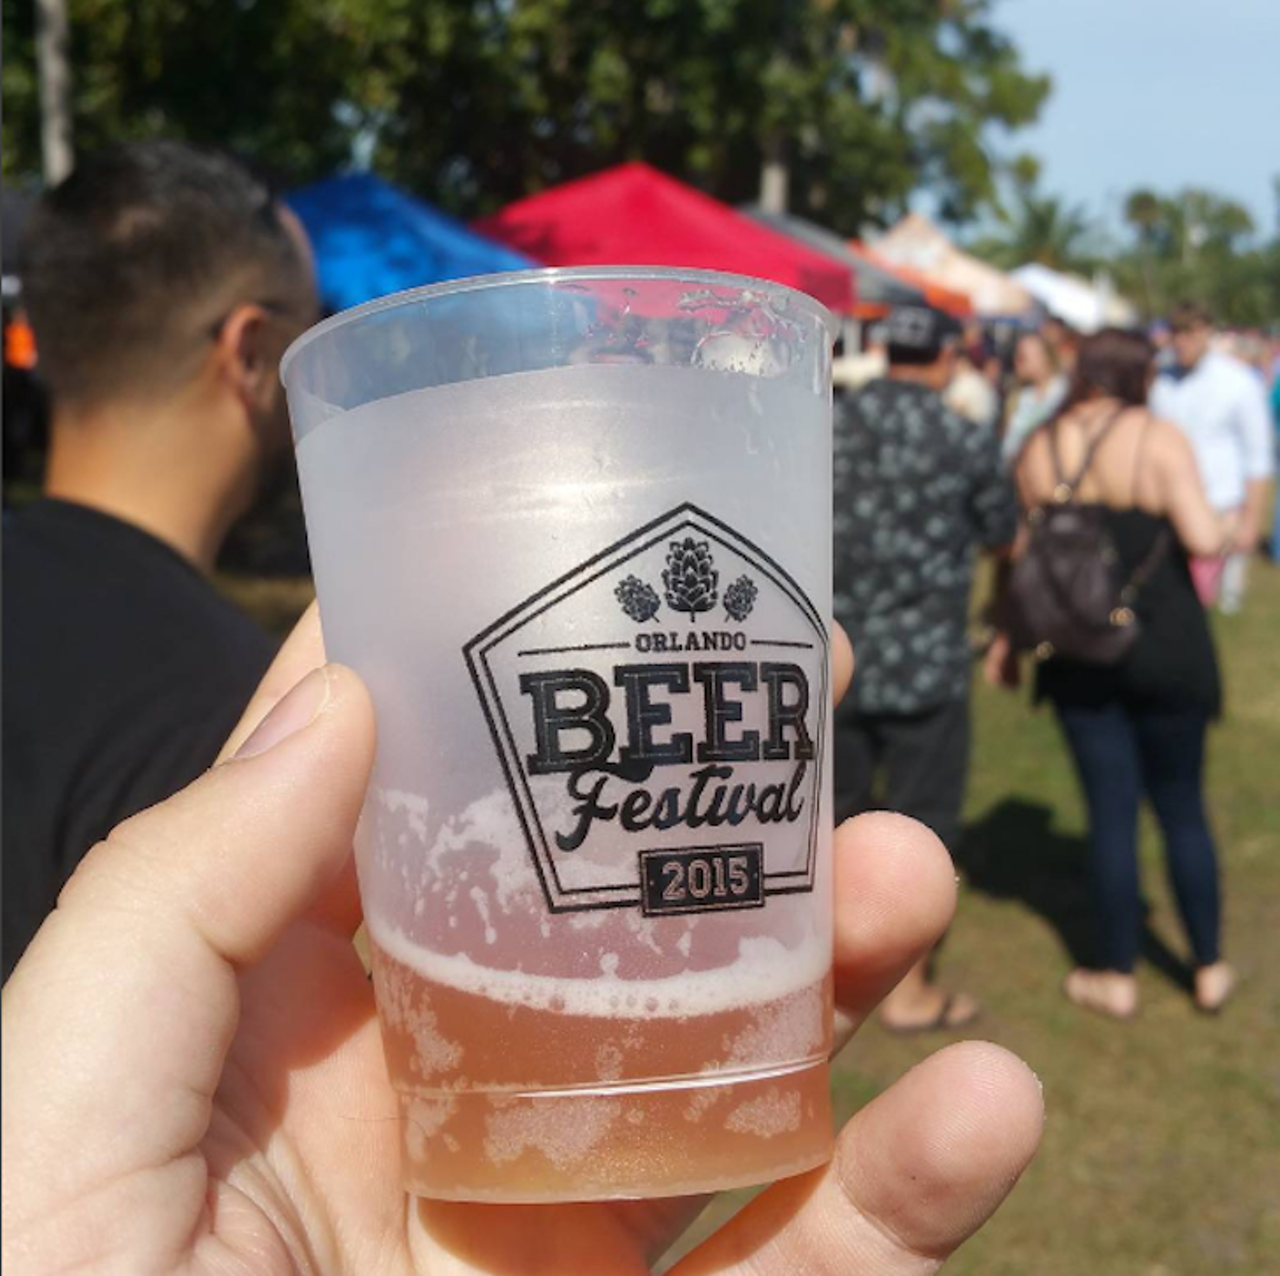 Orlando Beer Festival
Nov. 12, Festival Park, 2911 Robinson St., 407-377-0400 
The Orlando Beer Festival will allow attendees to have unlimited samples of over 150 beers from breweries and beer bars across Orlando. The samples are included in admission price, and there will also be live music, wine tasting and food. Over 21 only (naturally). 
Photo via orlandobungalower/Instagram